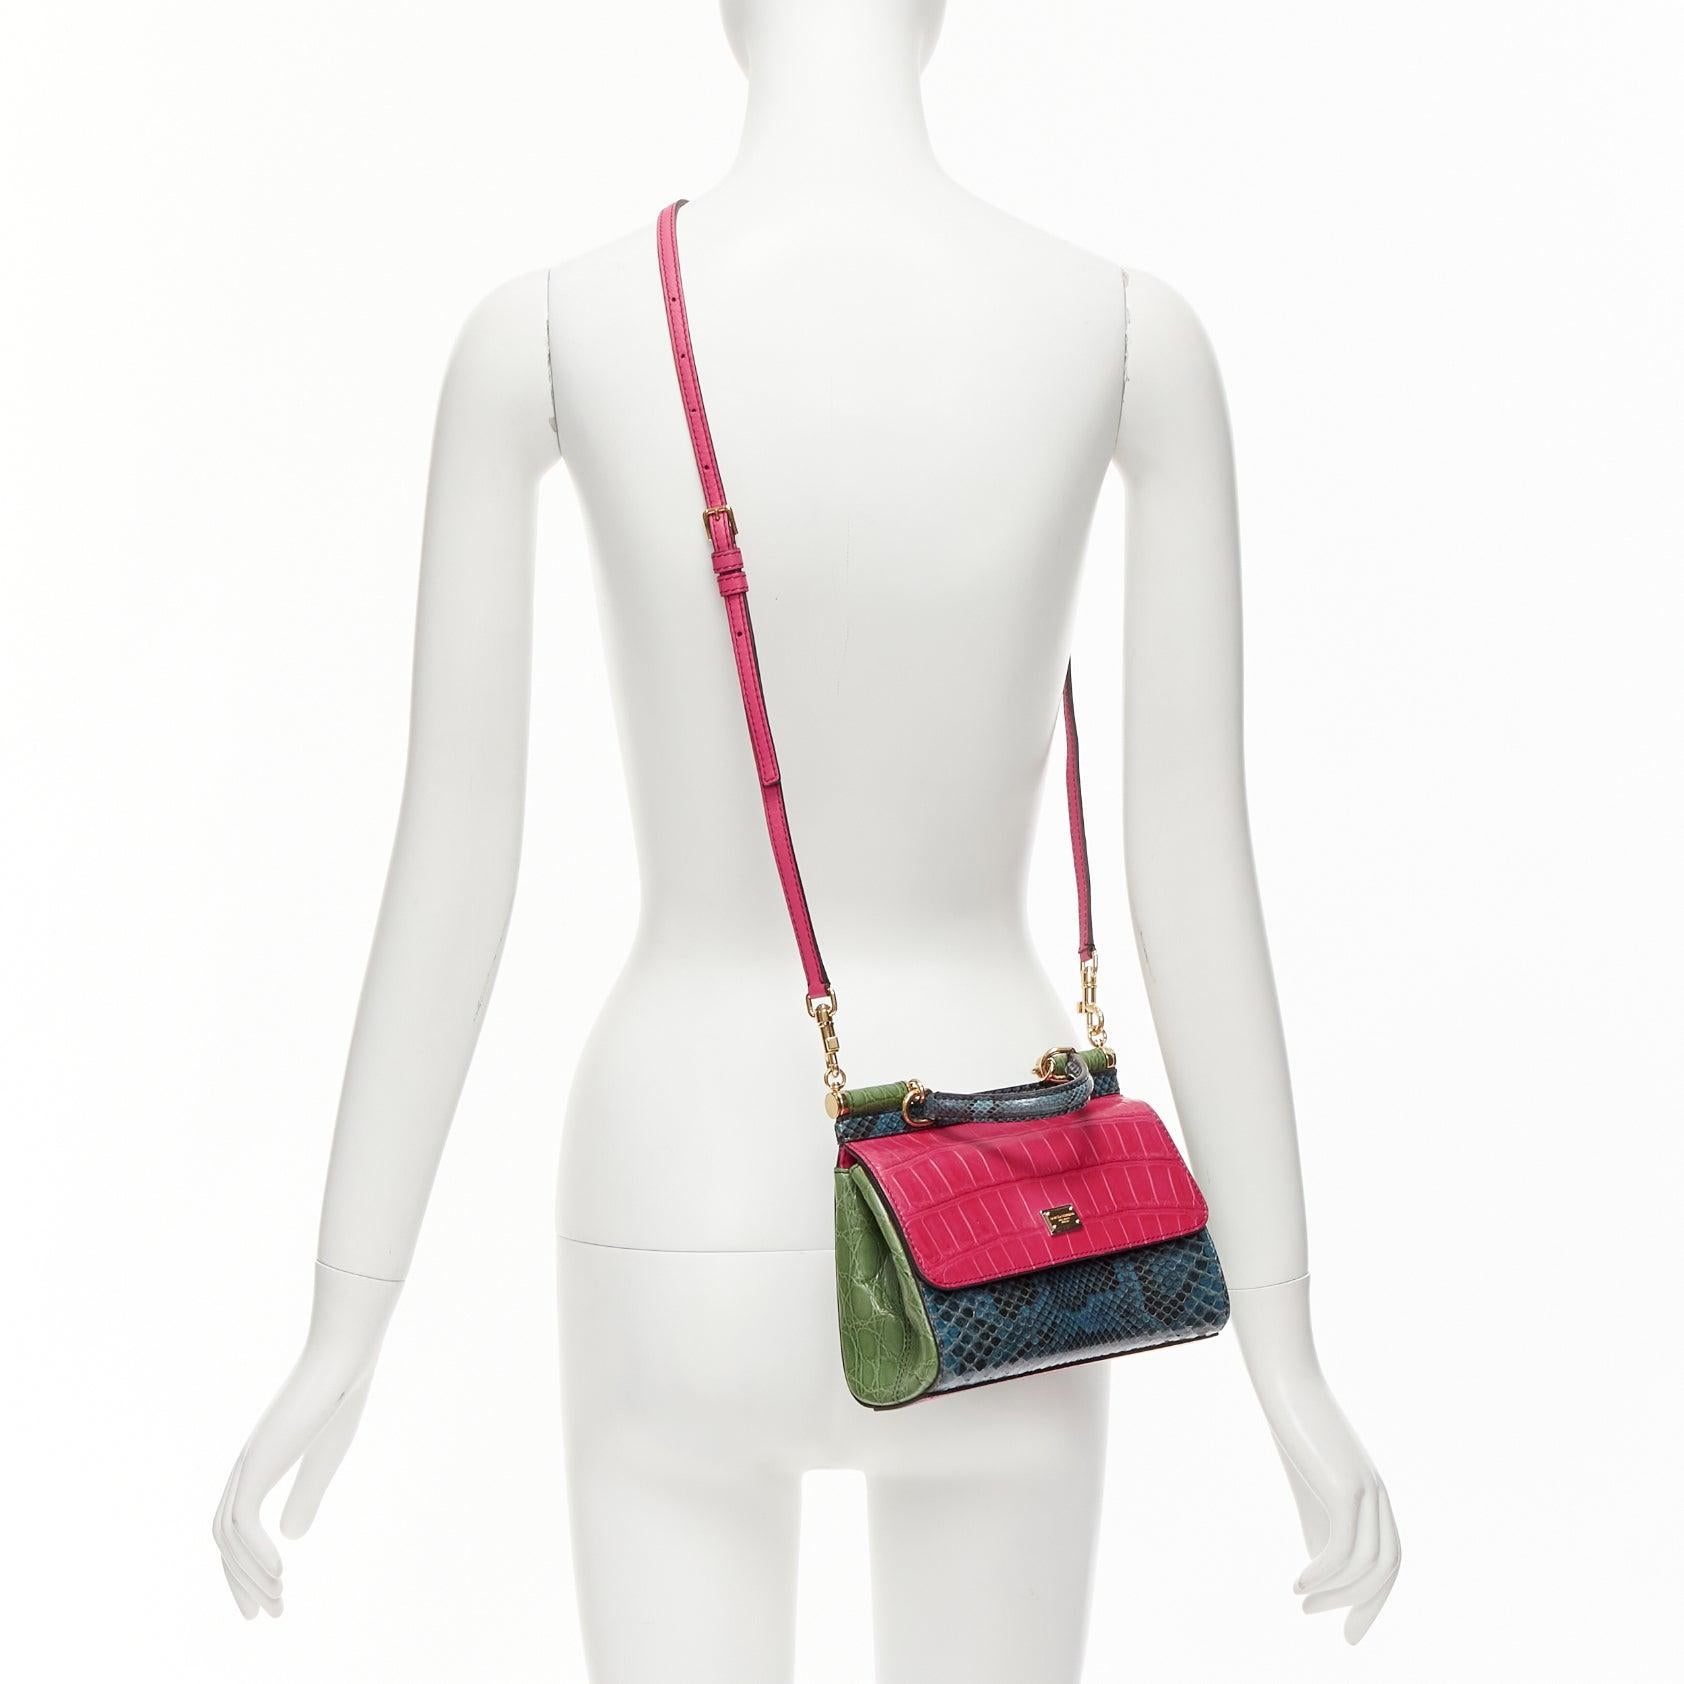 DOLCE GABBANA Miss Sicily pink navy green scaled leather colorblock crossbody bag
Reference: TGAS/D01135
Brand: Dolce Gabbana
Designer: Domenico Dolce and Stefano Gabbana
Model: Miss Sicily
Material: Leather
Color: Pink, Blue
Pattern: Animal